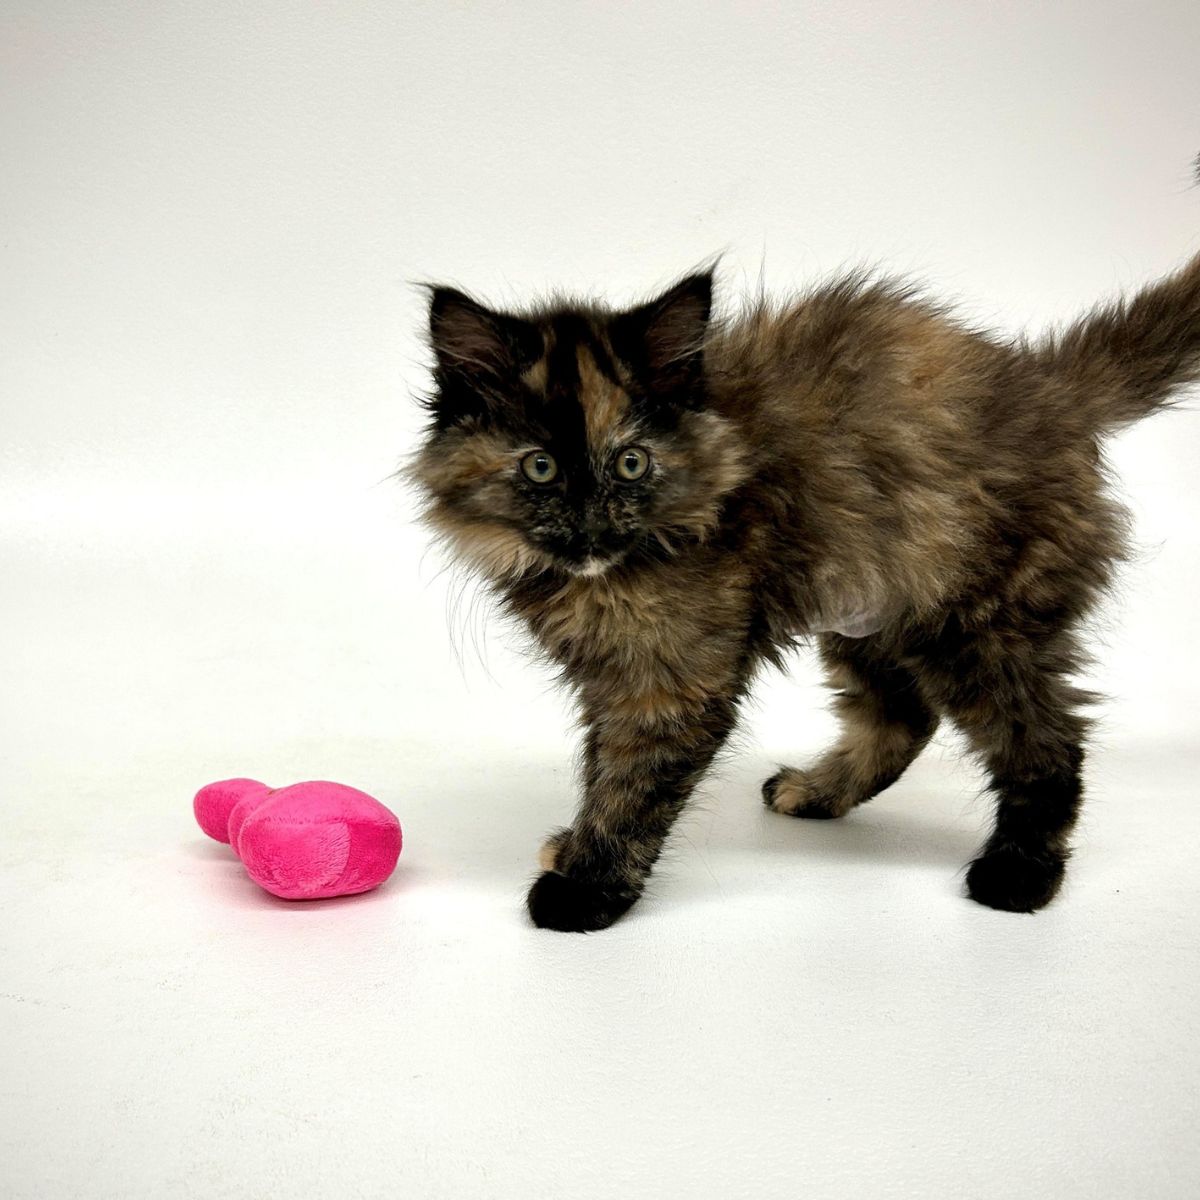 photo of kitten and a pink toy